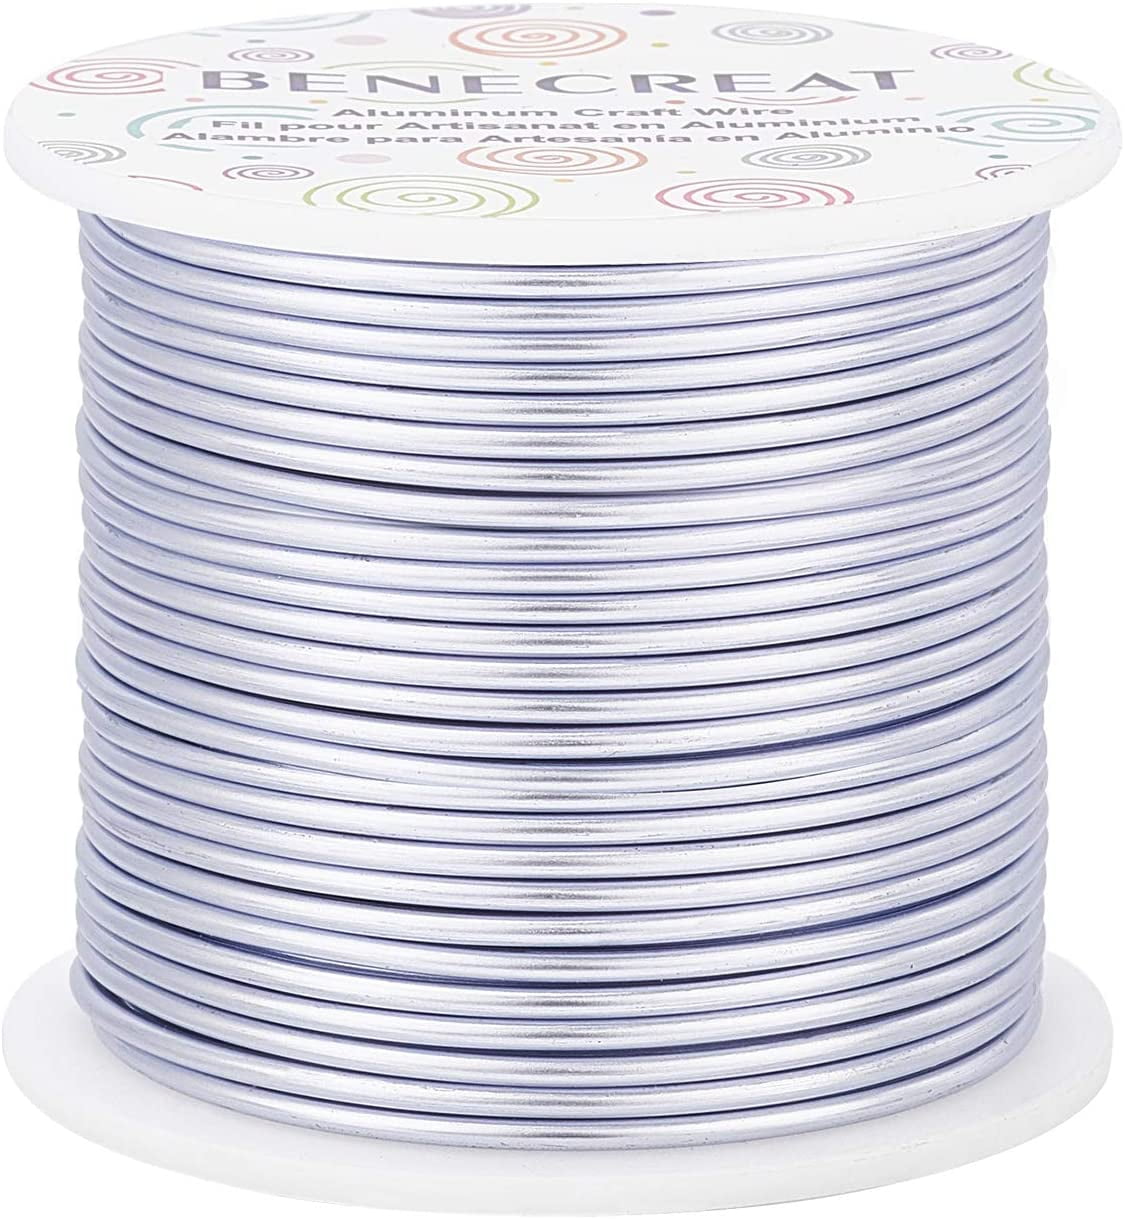 12 Pack: Aluminum Jewelry Wire by Bead Landing™, 12 Gauge